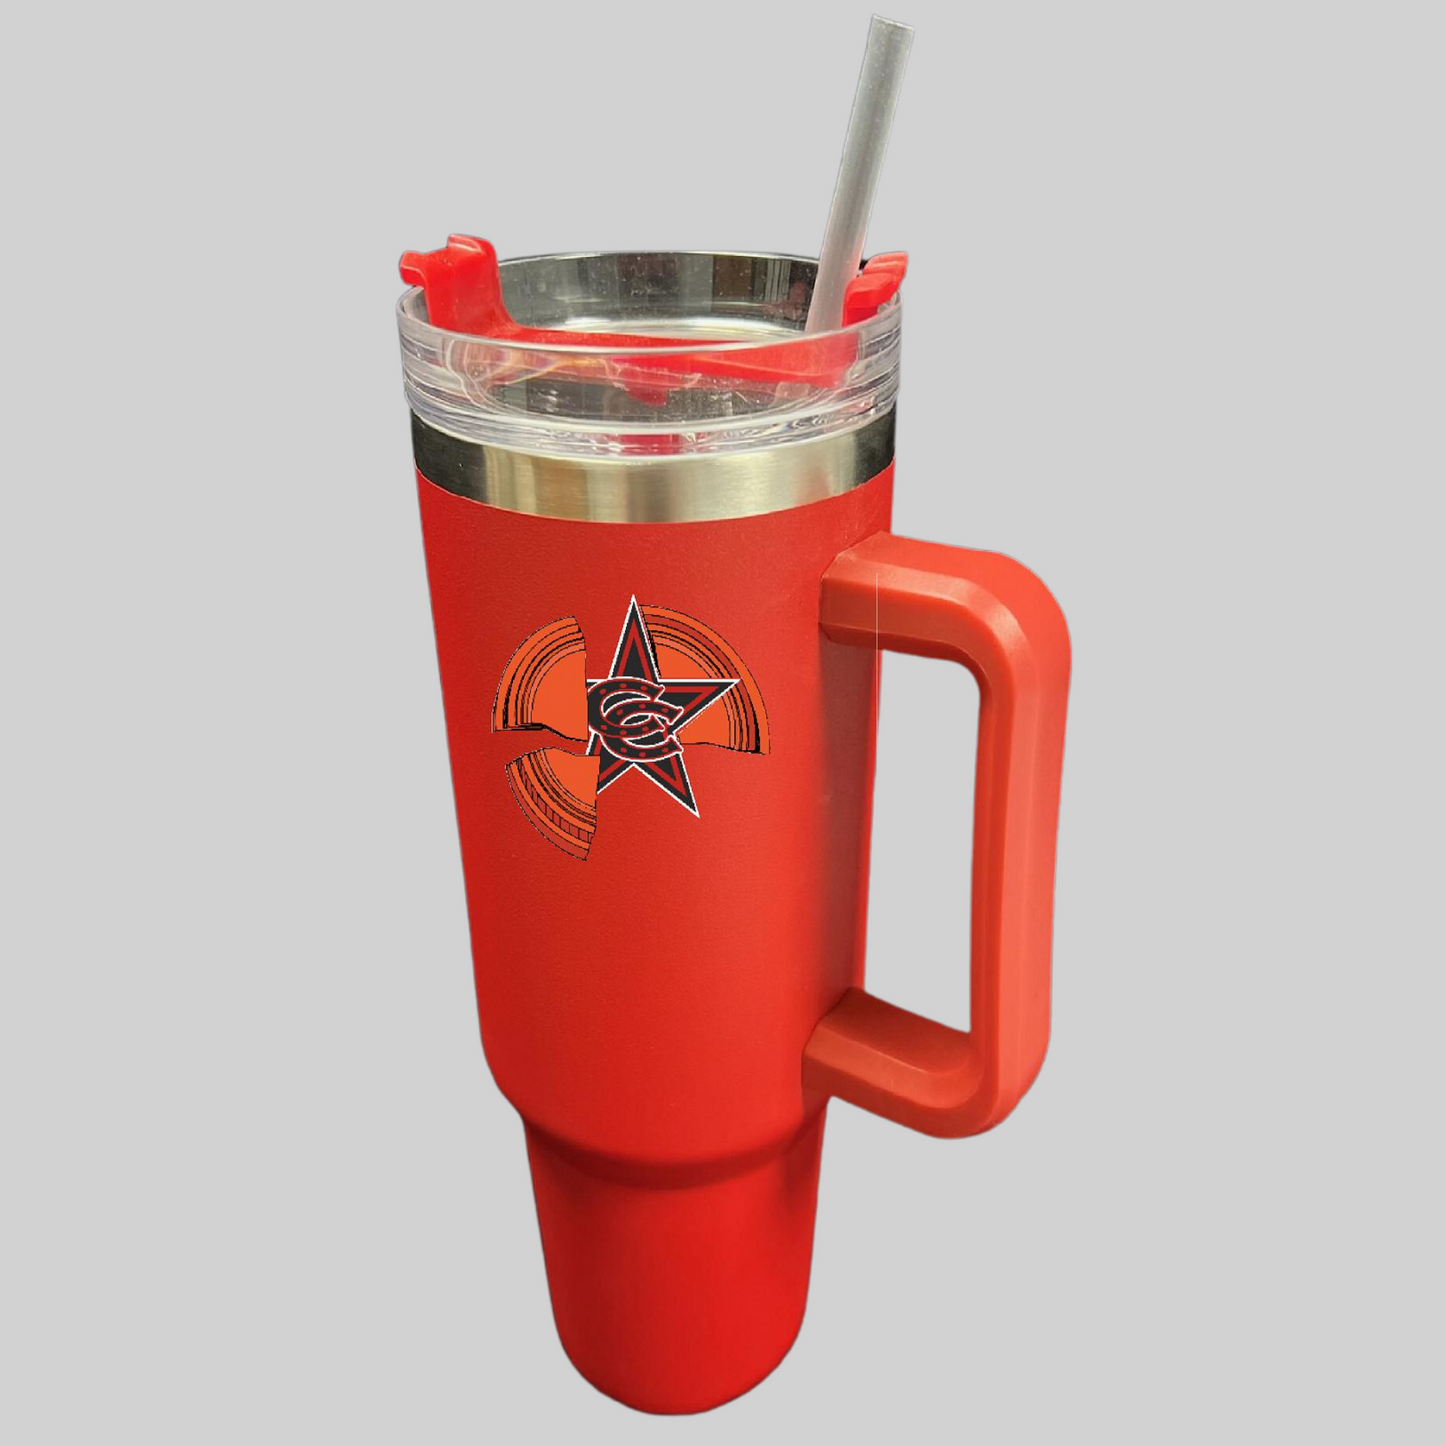 Coppell High School Competitive Shooting Team Tumbler